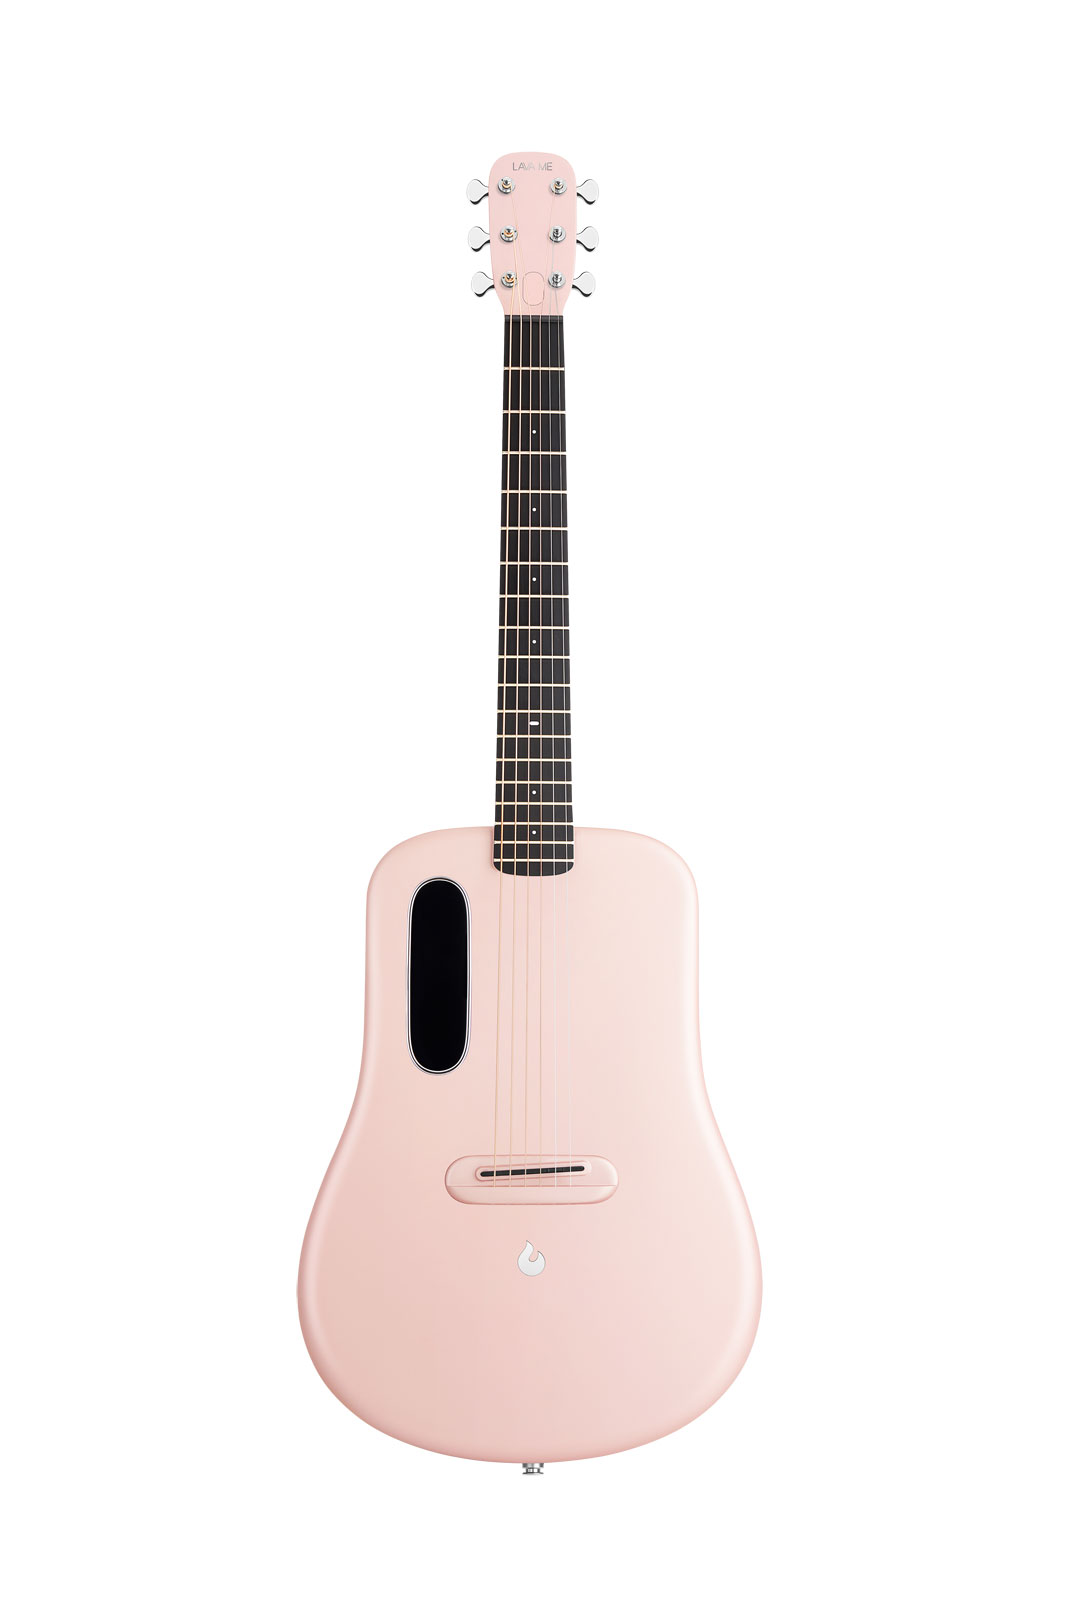 LAVA MUSIC LAVA ME 4 CARBON SERIES 38'' PINK - WITH SPACE BAG - REFURBISHED